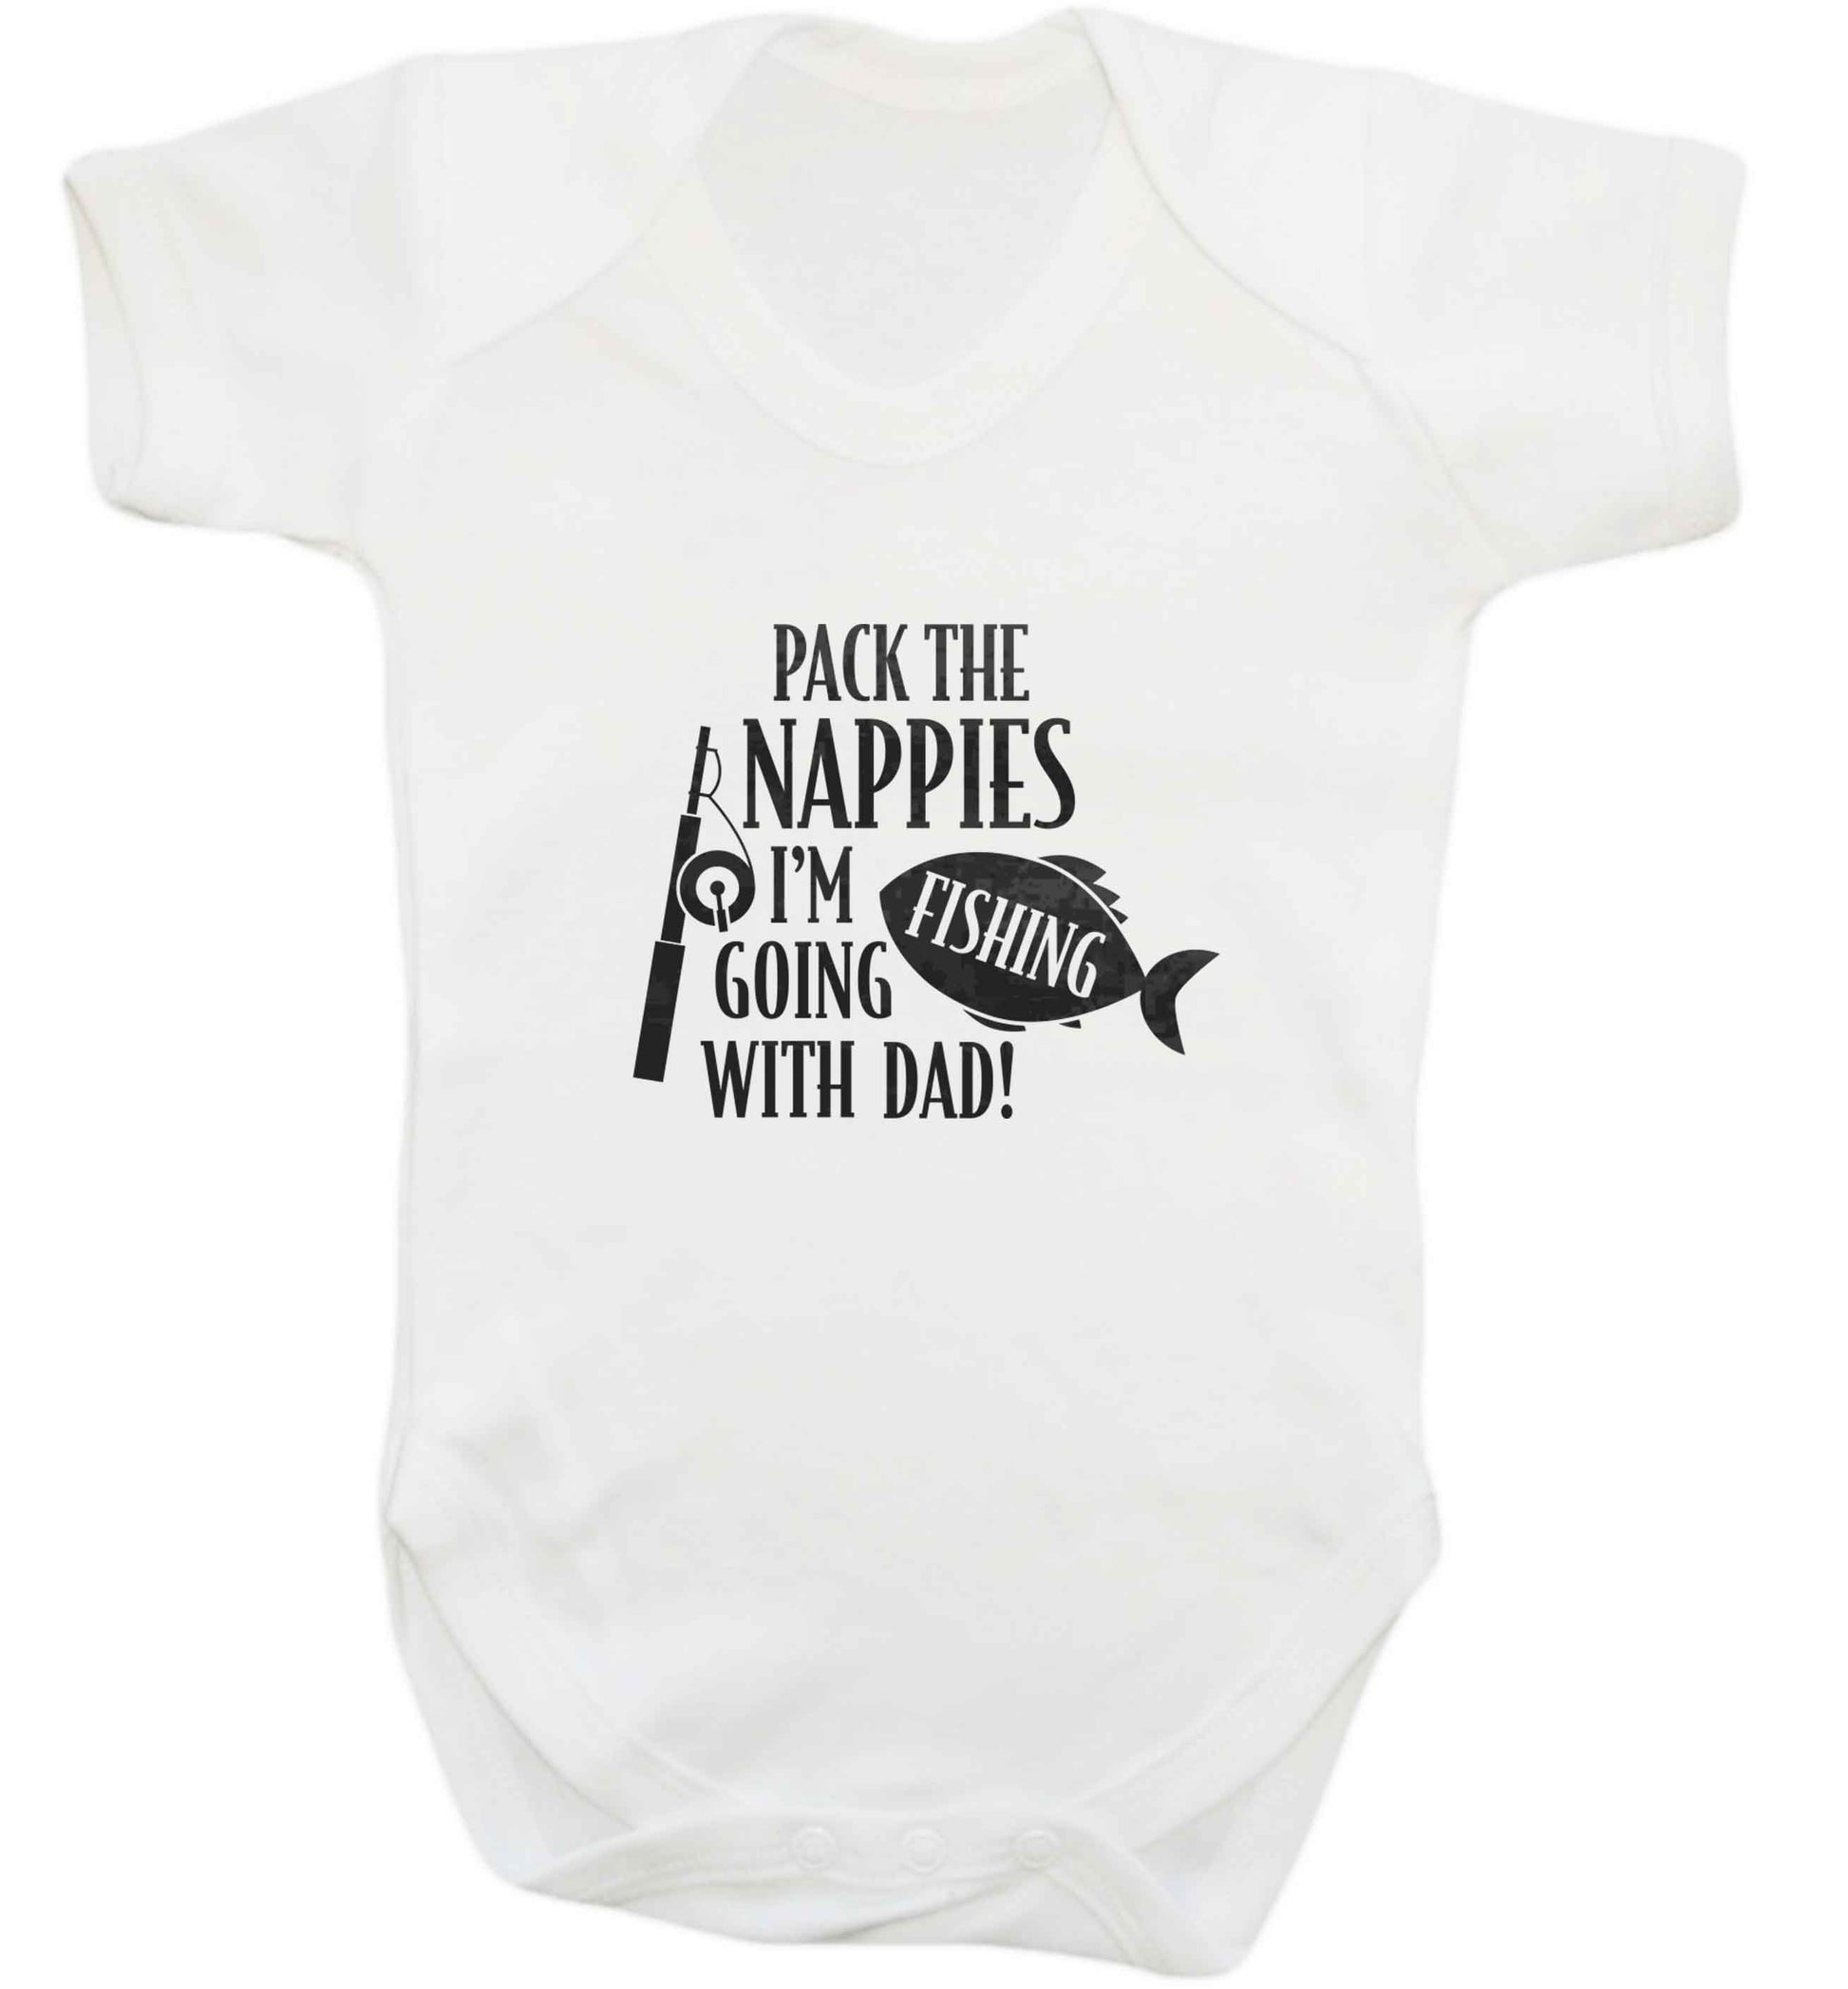 Pack the nappies I'm going fishing with Dad baby vest white 18-24 months